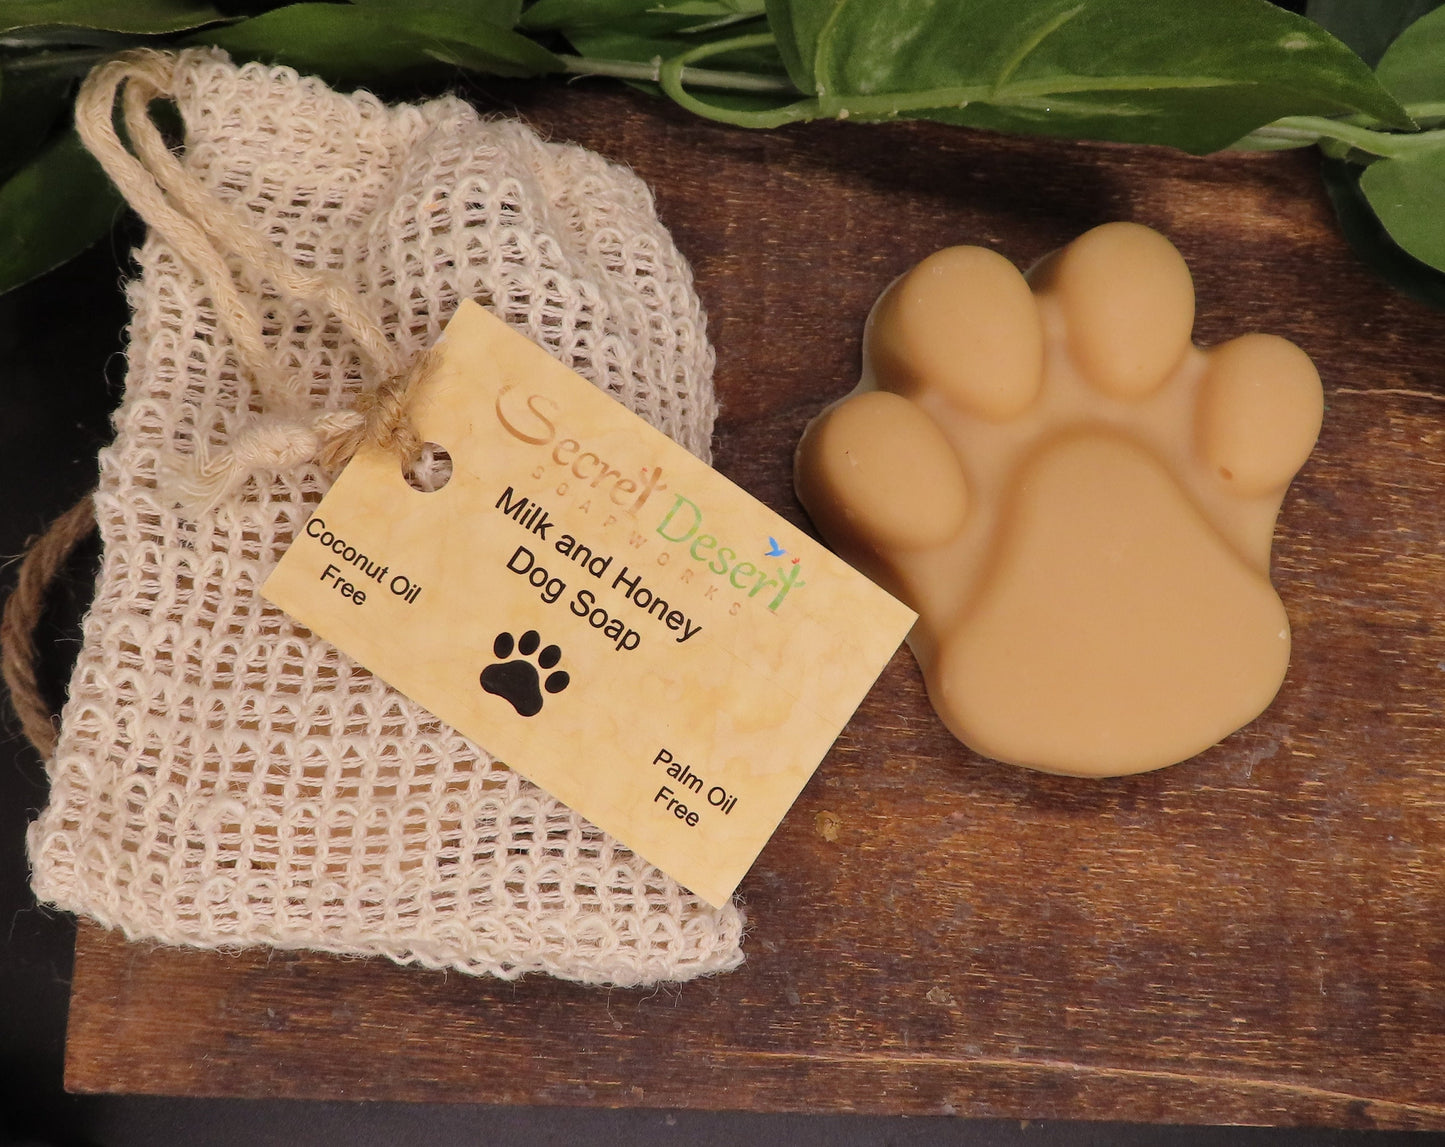 Cold processed natural soap for dogs. Only 4 ingredients. Laurelberry Oil, Babassu Oil, Honey and Goat Milk